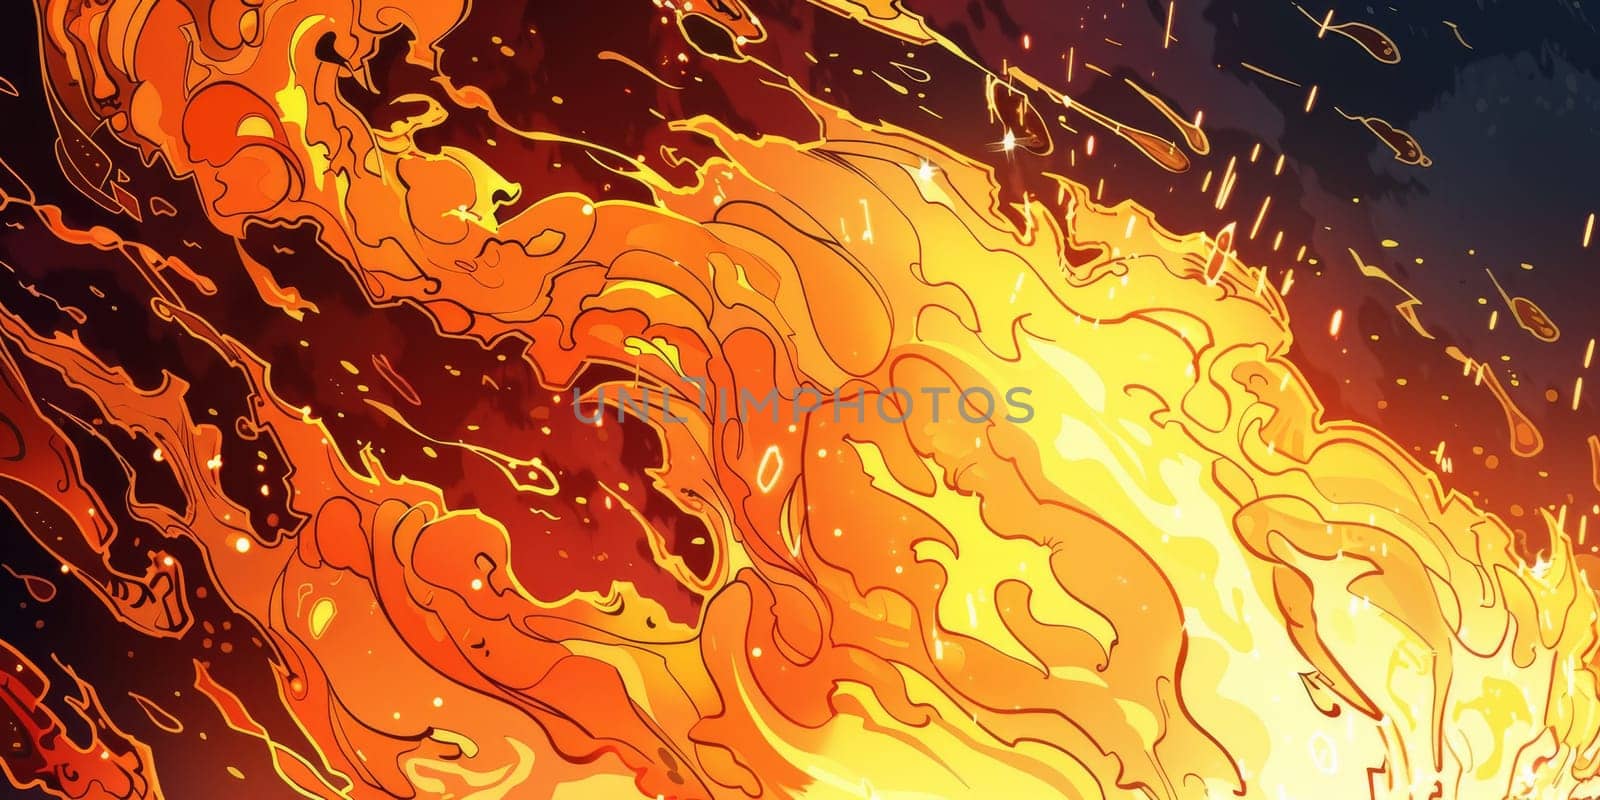 Close-up view of vibrant flames blazing from a fire by Kadula